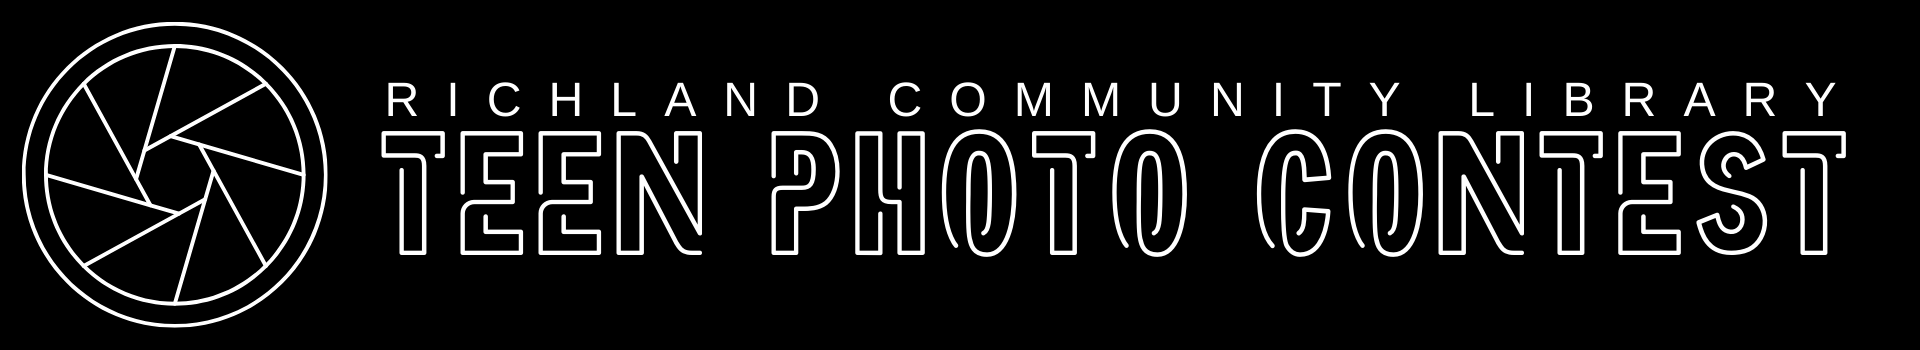 Teen Photo Contest banner.png